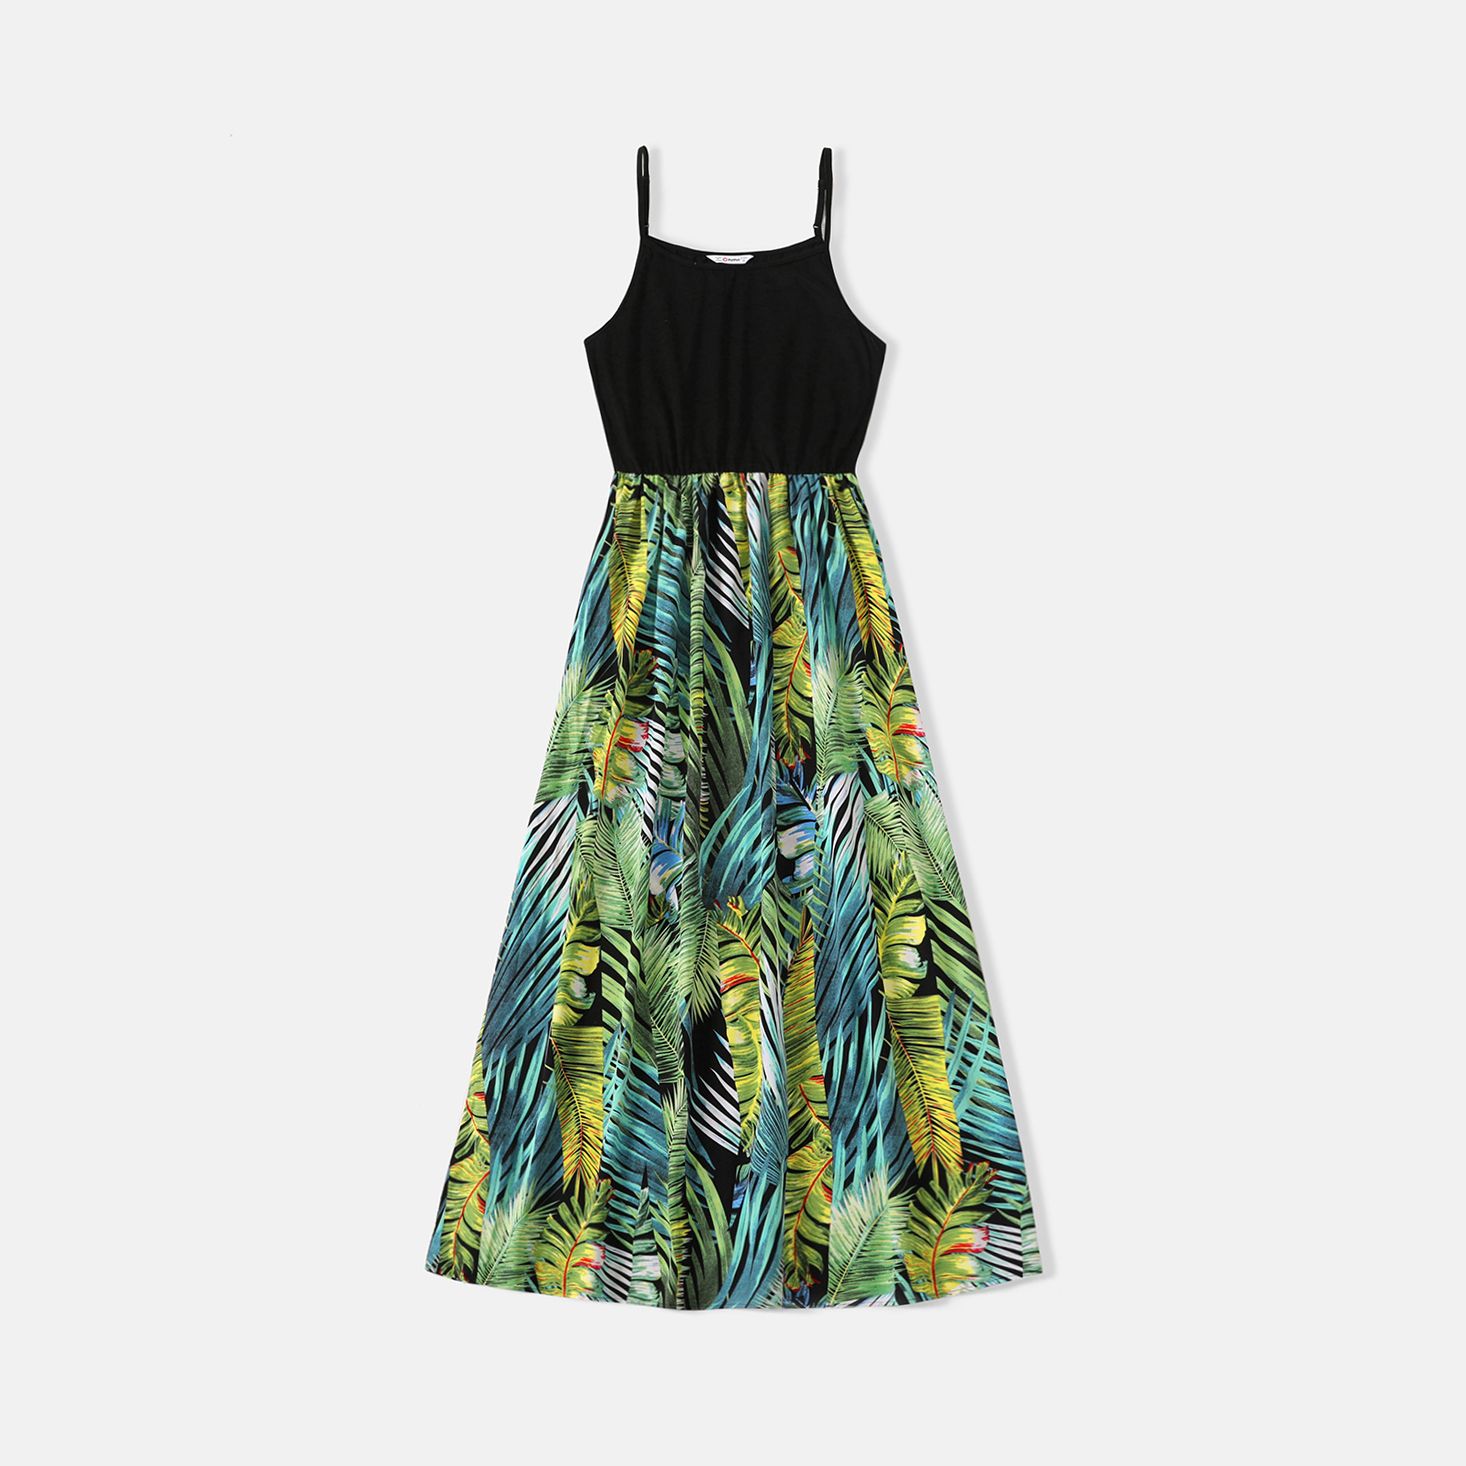 Family Matching Allover Plant Print Spliced Cami Dresses And Short-sleeve Tops Sets